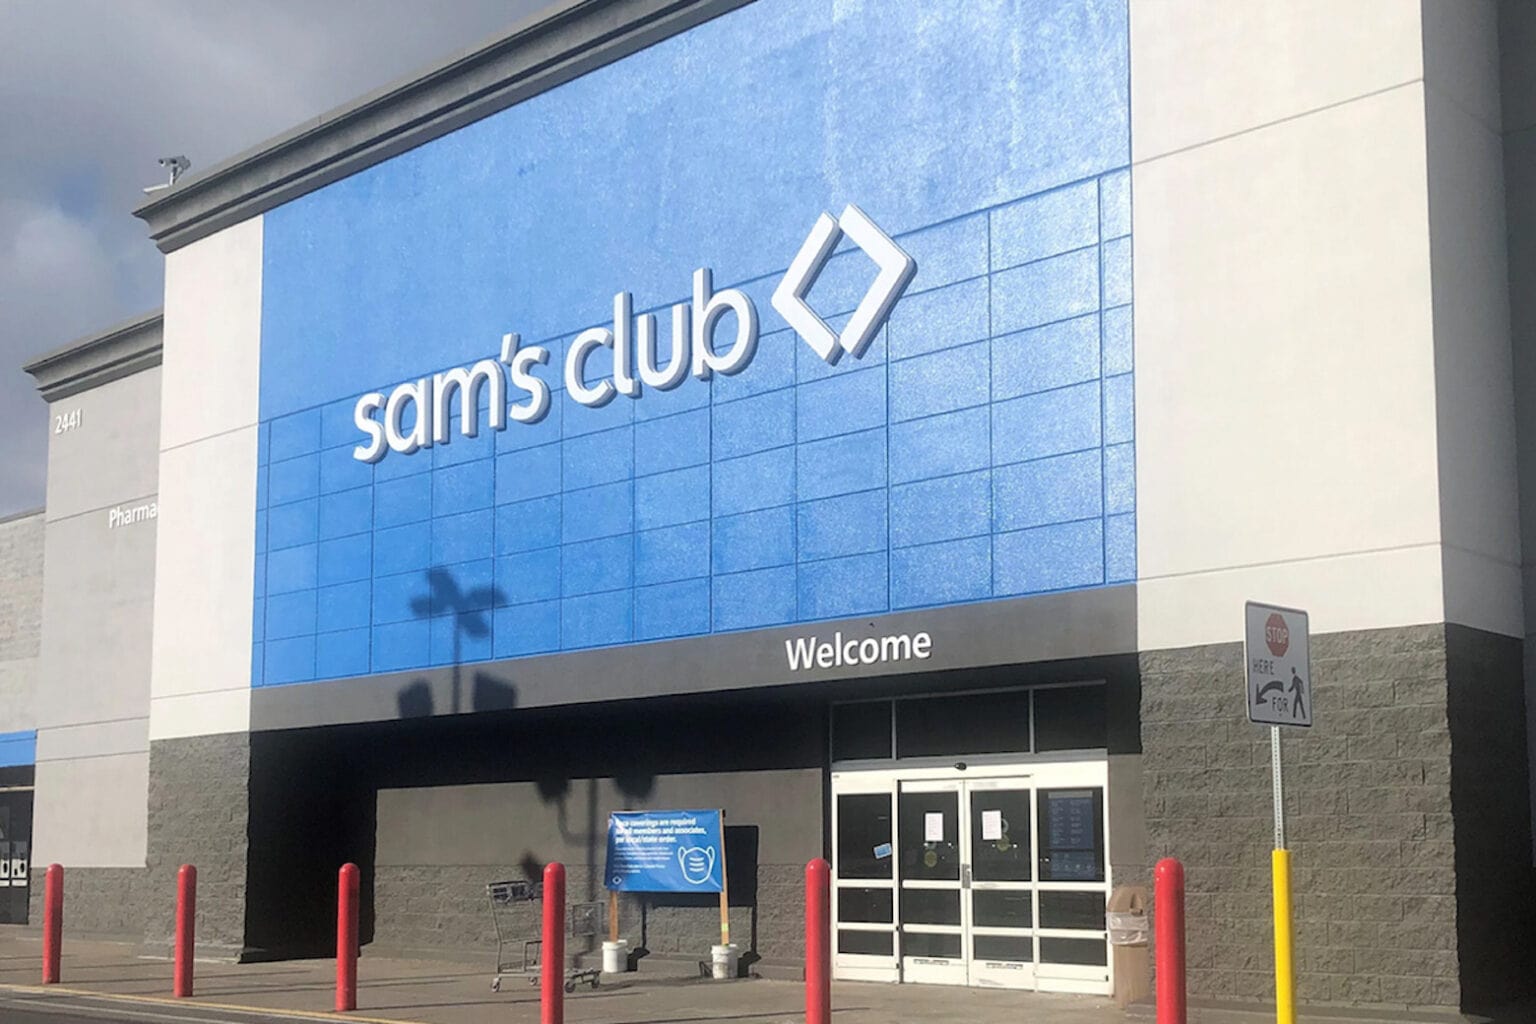 With this Sam's Club Membership, you can find better discounts on the things you need.